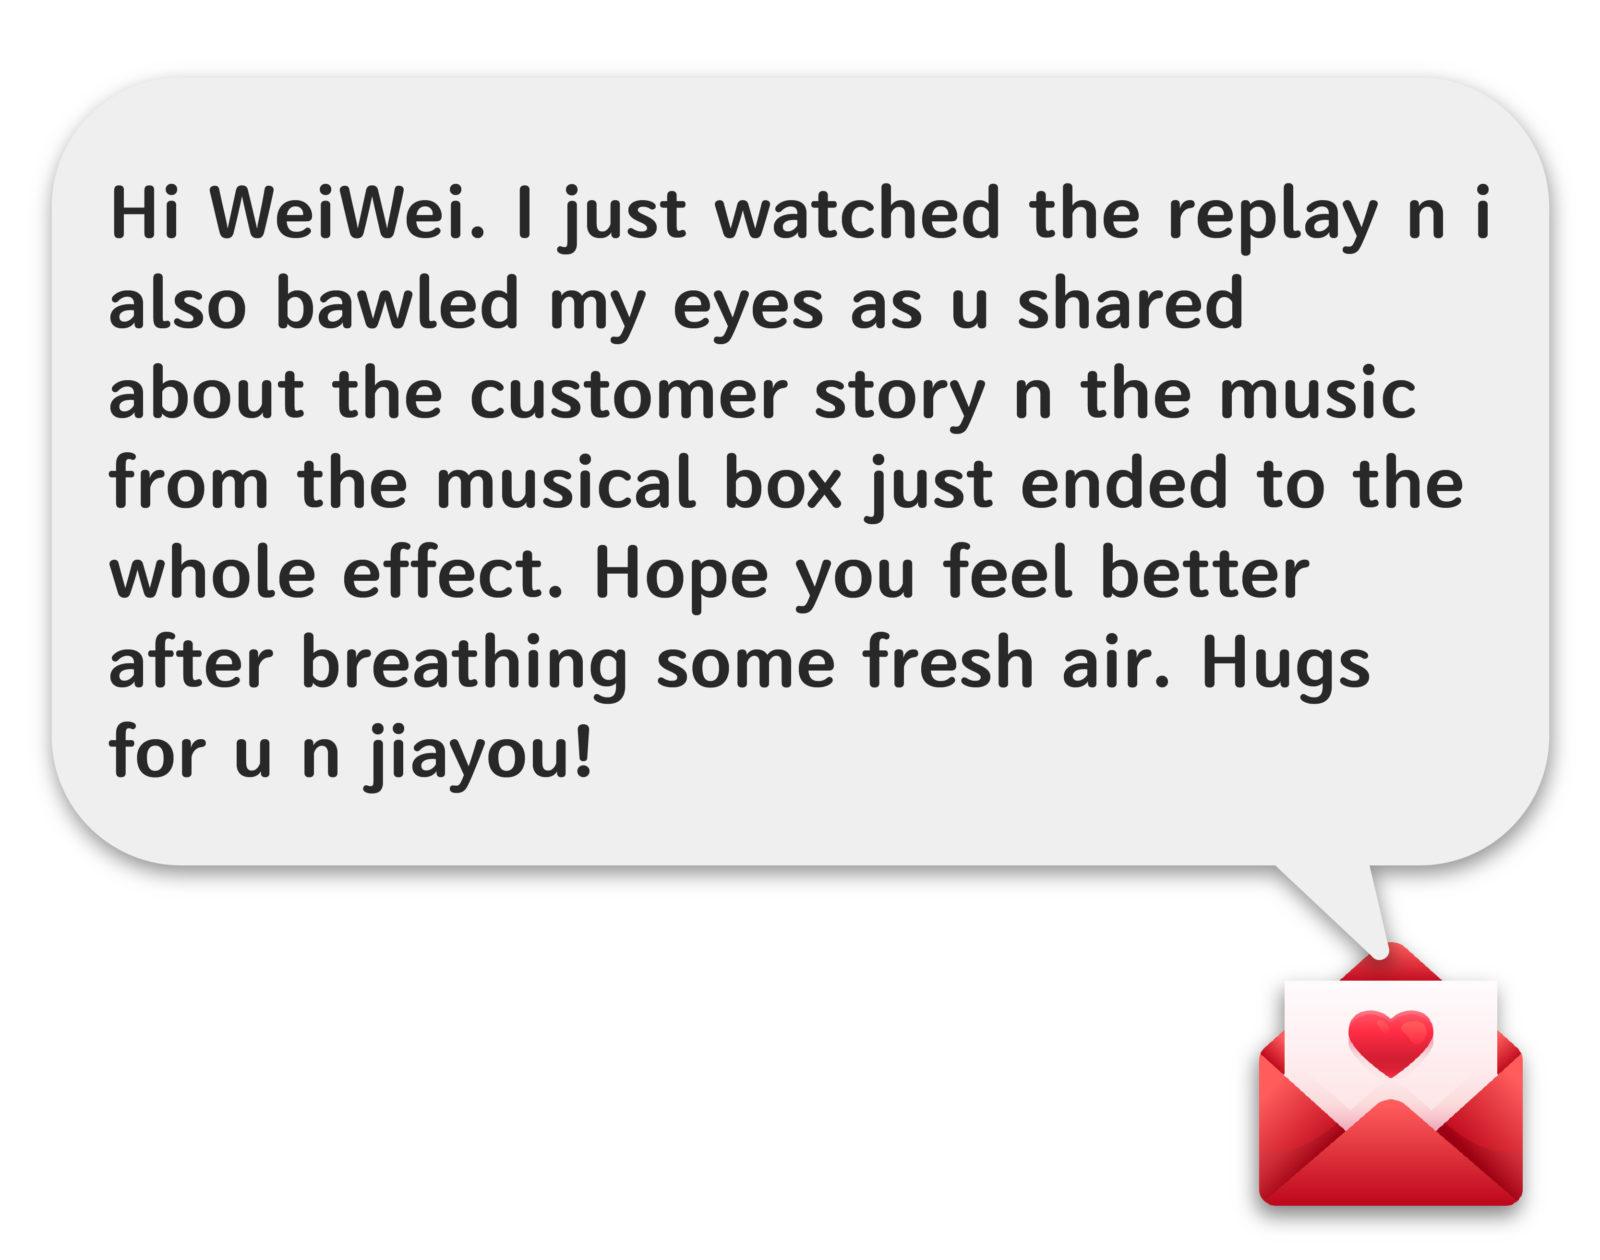 Hi WeiWei, I just watched the replay n i also bawled my eyes as u shared about the customer story n the music from the musical box just ended to the whole effect. Hope you feel better after breathing some fresh air. Hugs for u n jiayou!